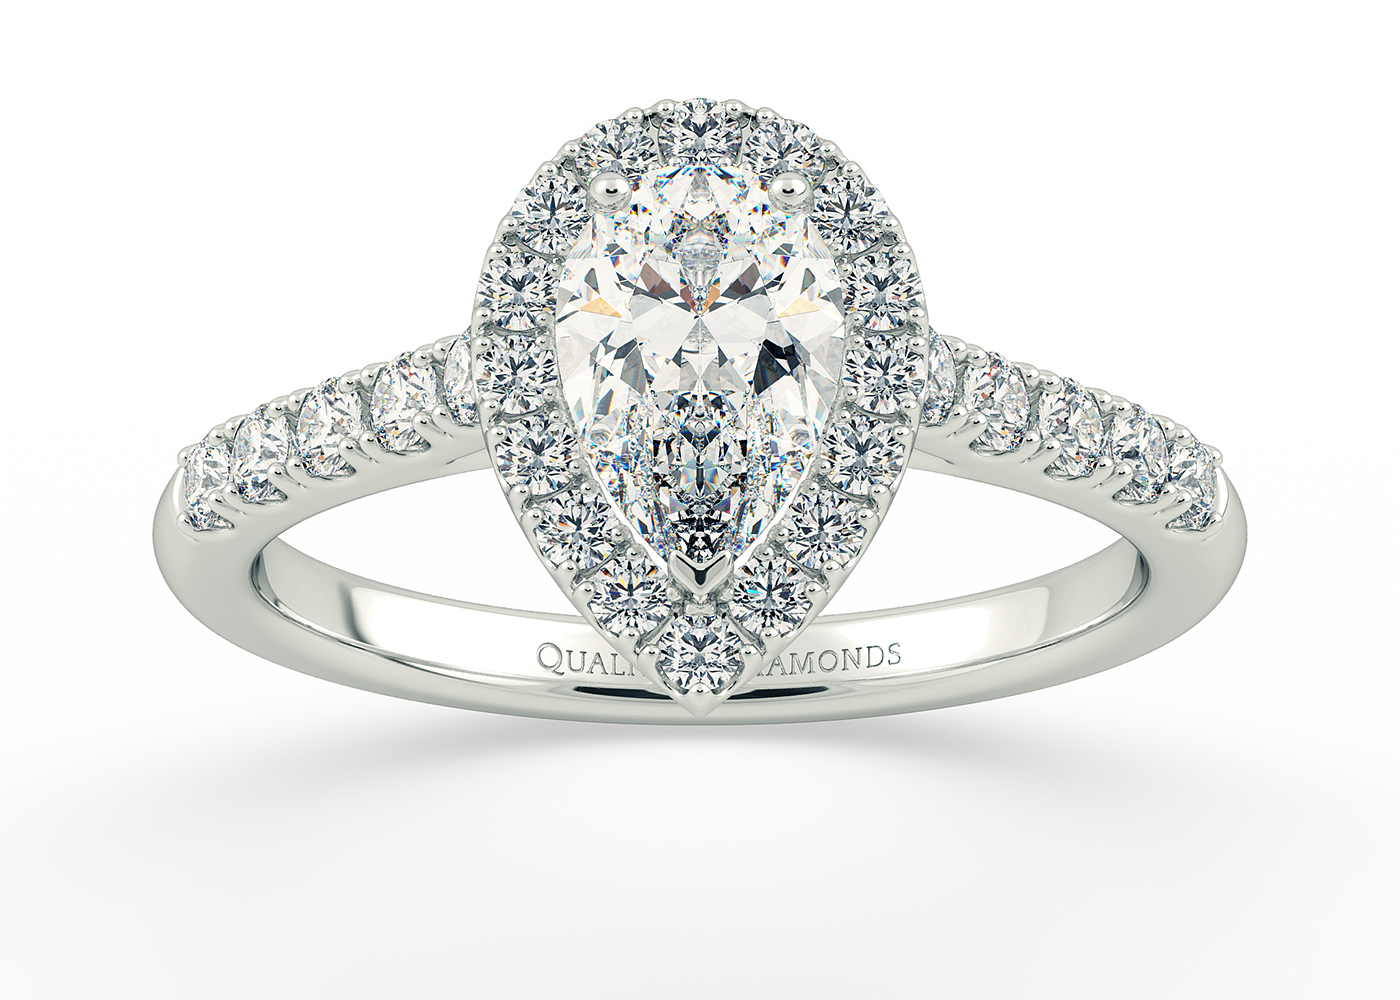 One Carat Pear Halo Diamond Ring in 9K White Gold